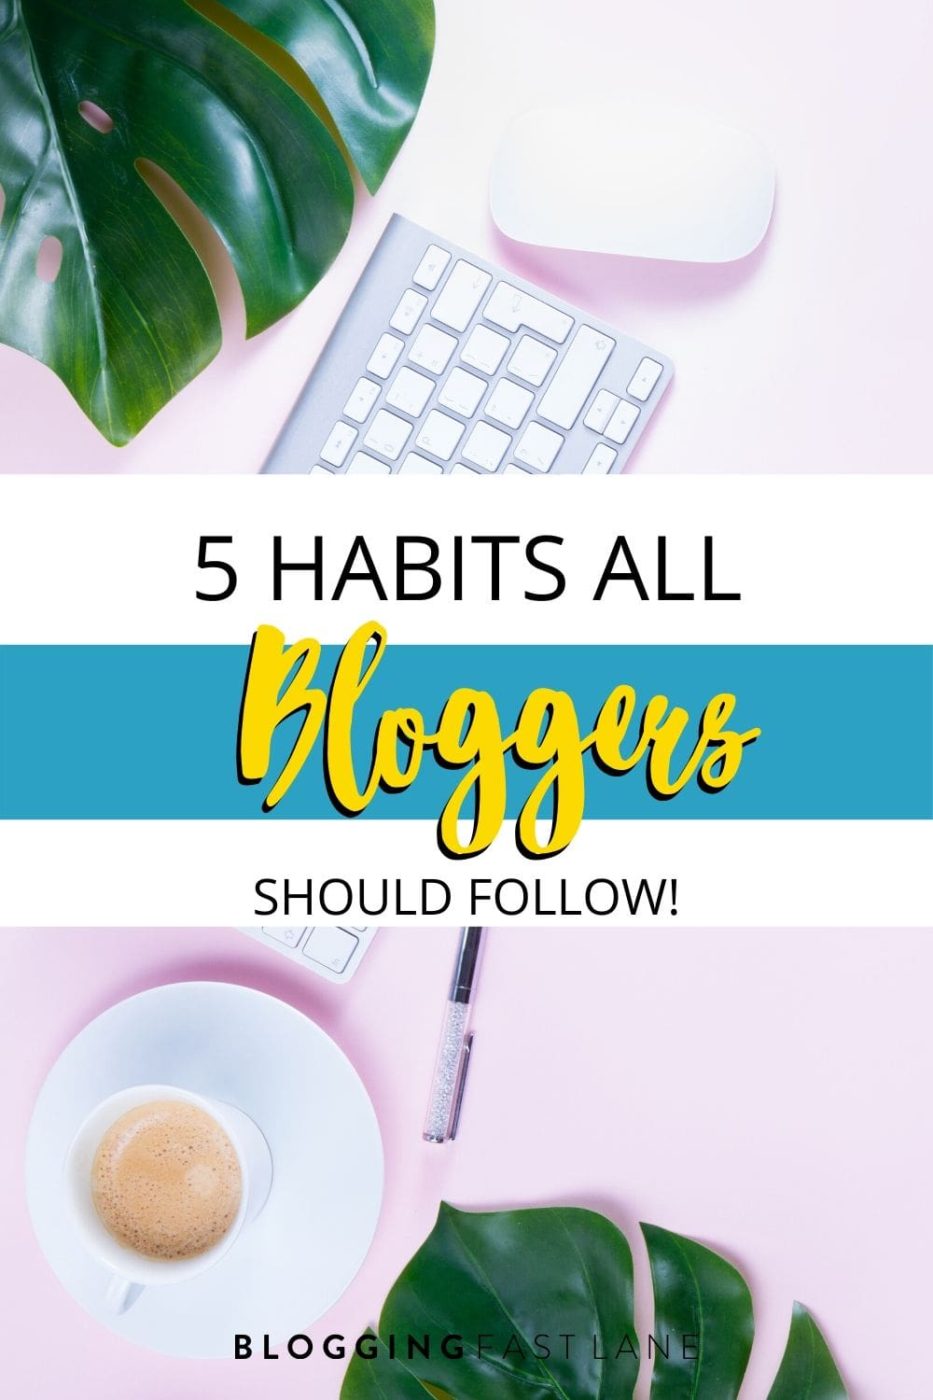 Habits For Bloggers | To succeed in blogging, all bloggers must have these 5 habits. Click to find out what they are!